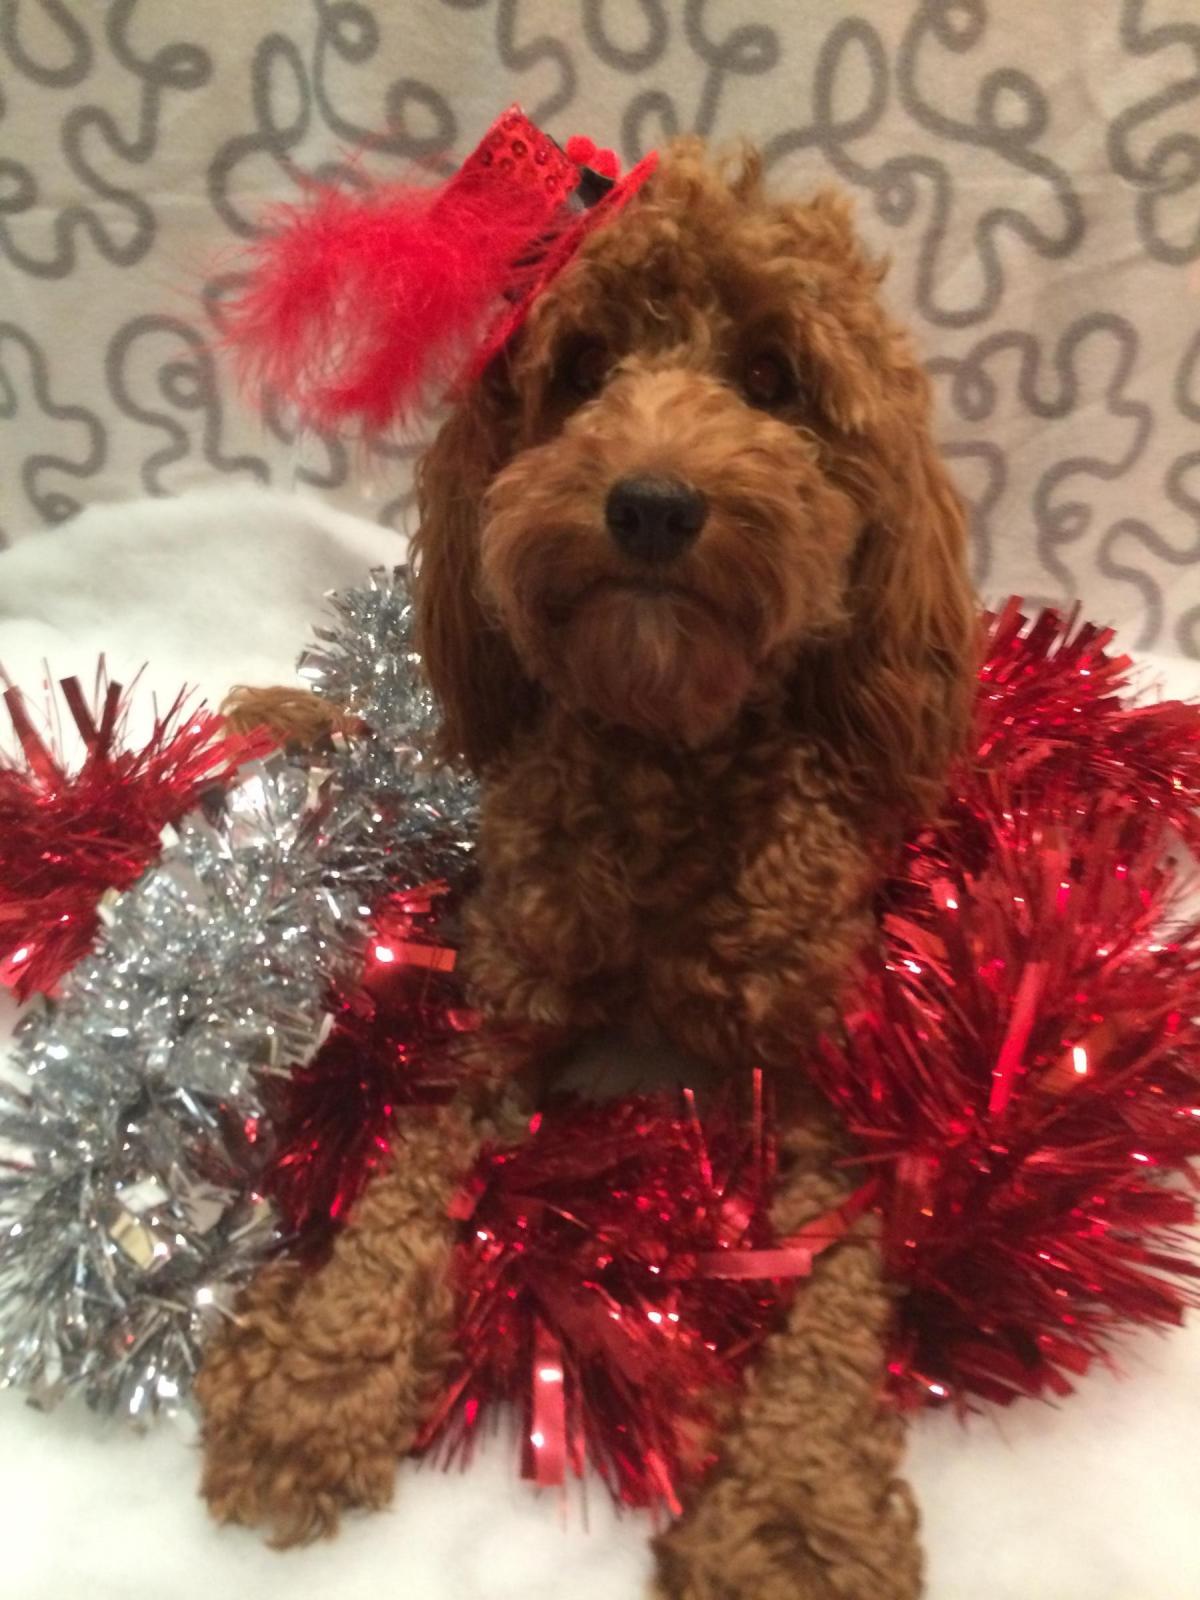 Joanne Harker from Darlington sent in this photo of her dog Matilda